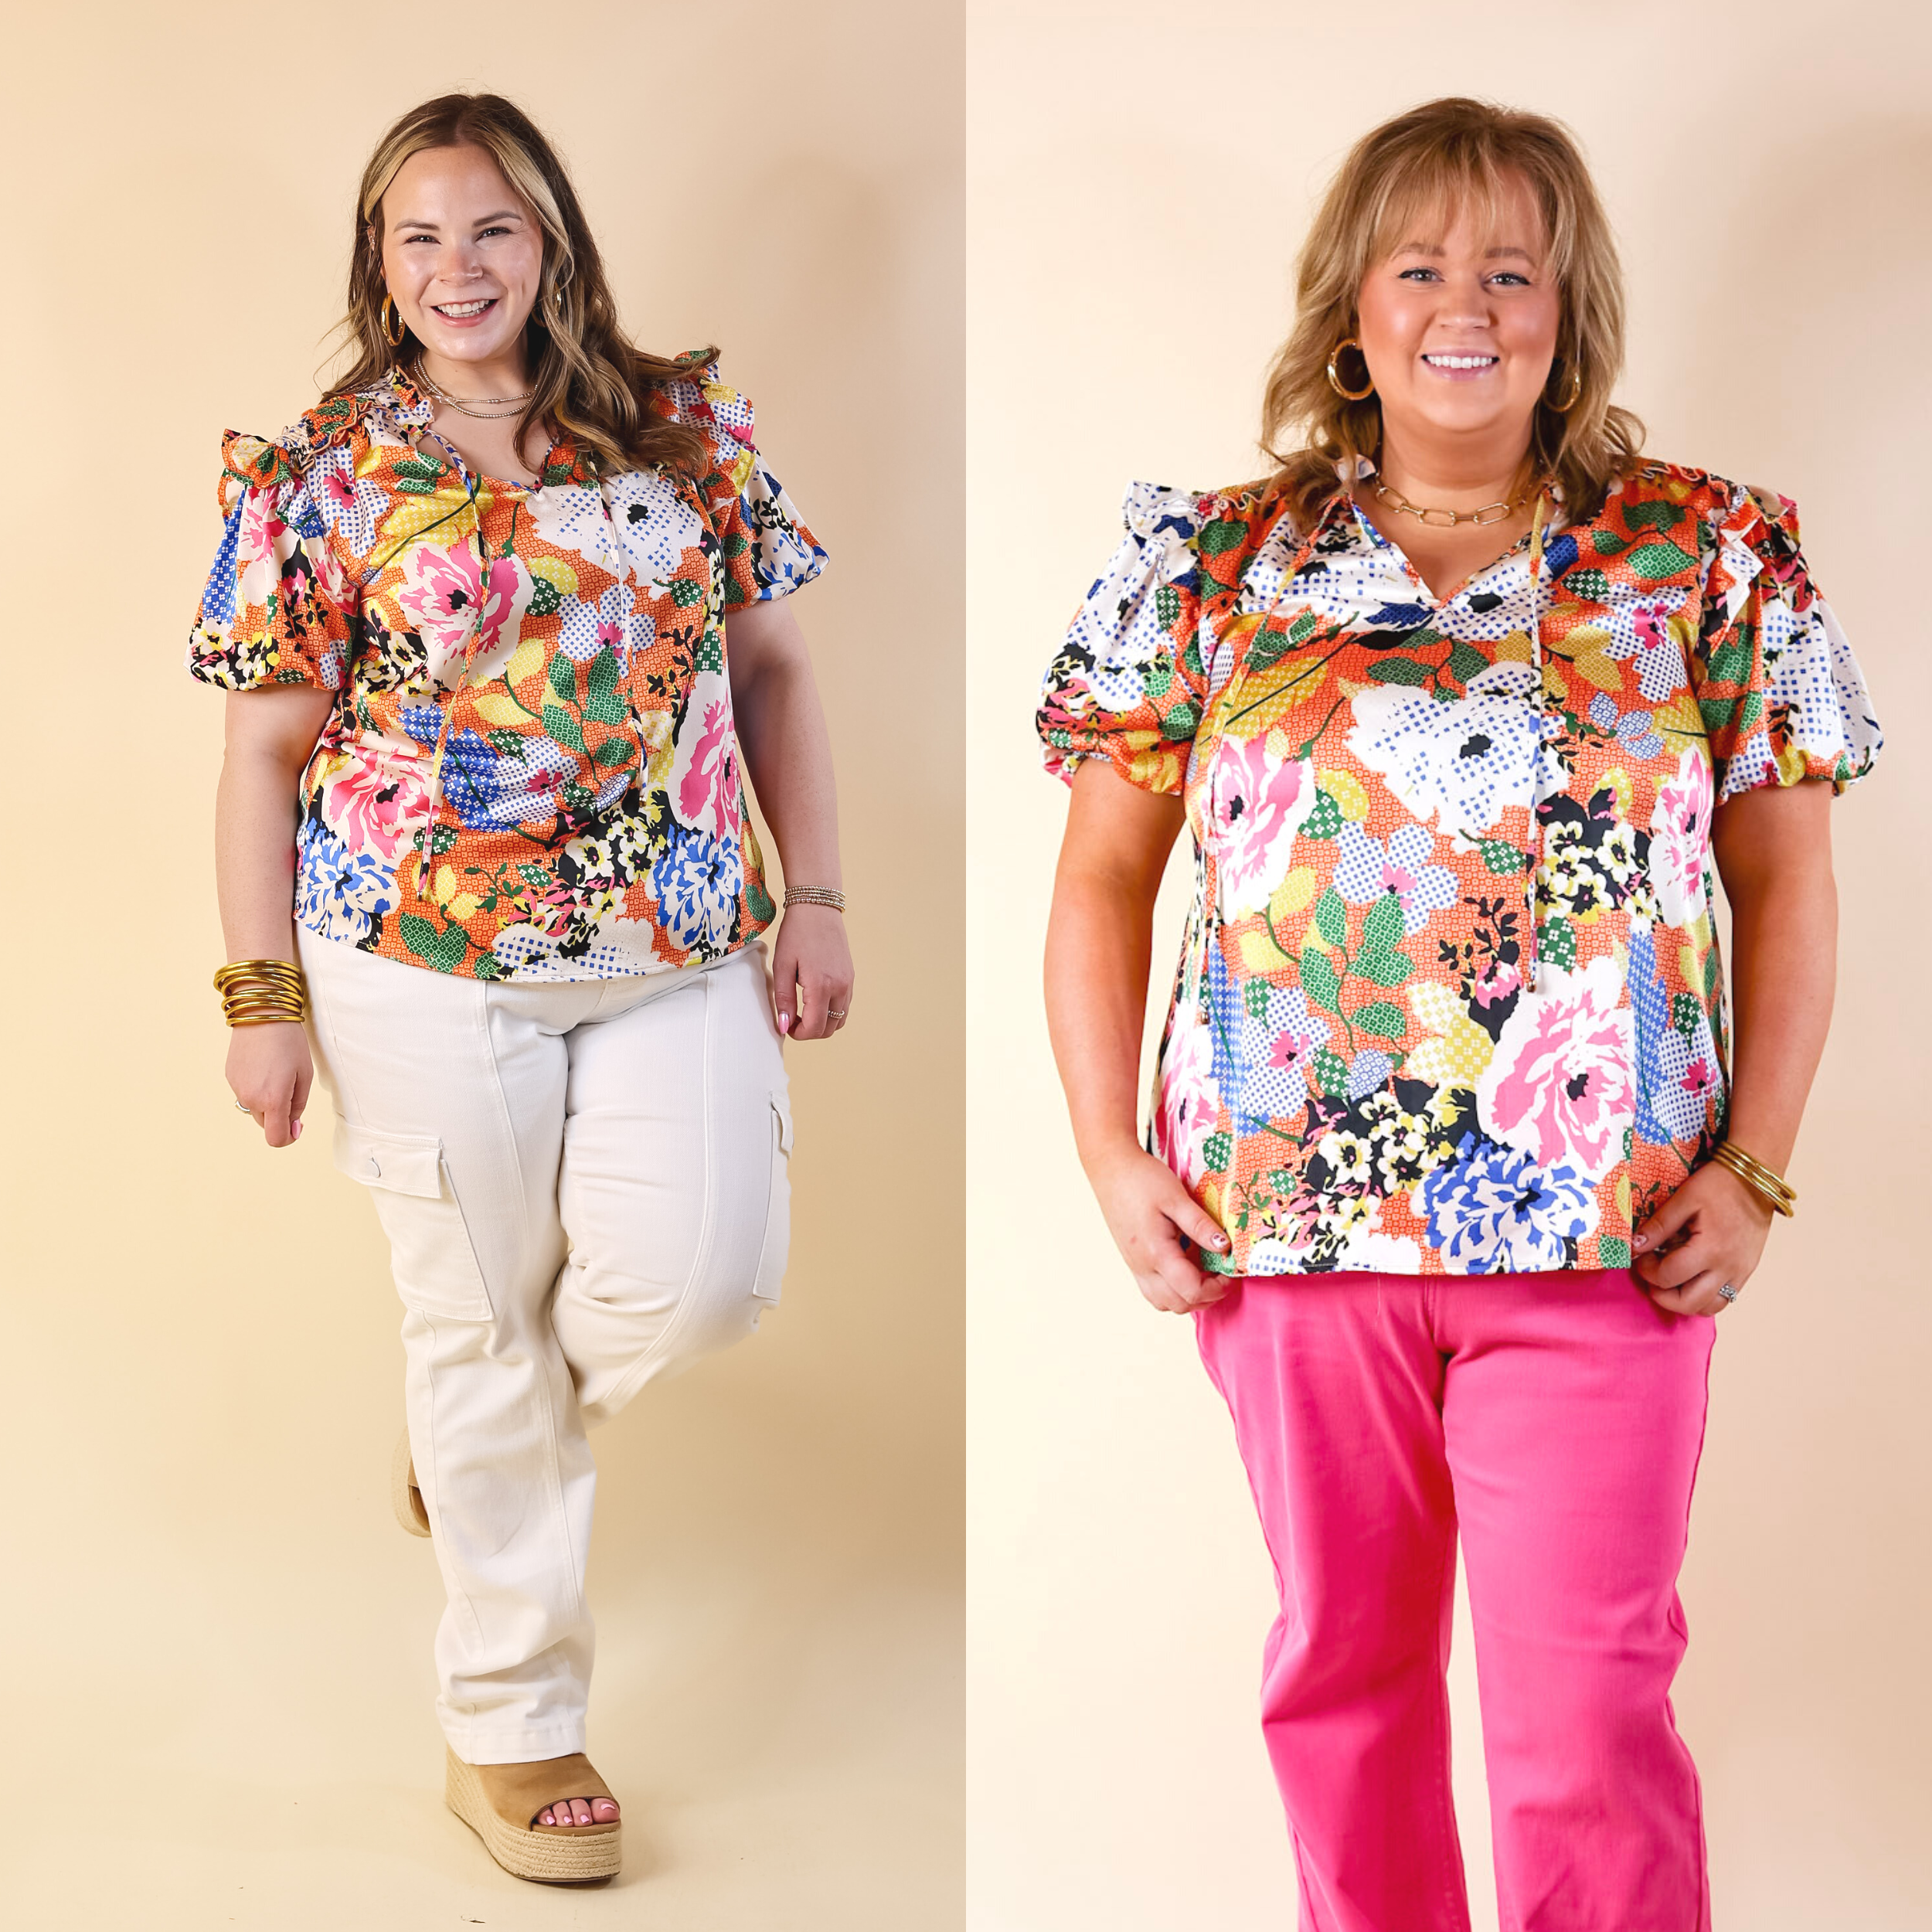 Malibu Villa Floral Print Top with Keyhole and Tie Neckline in Orange Mix - Giddy Up Glamour Boutique